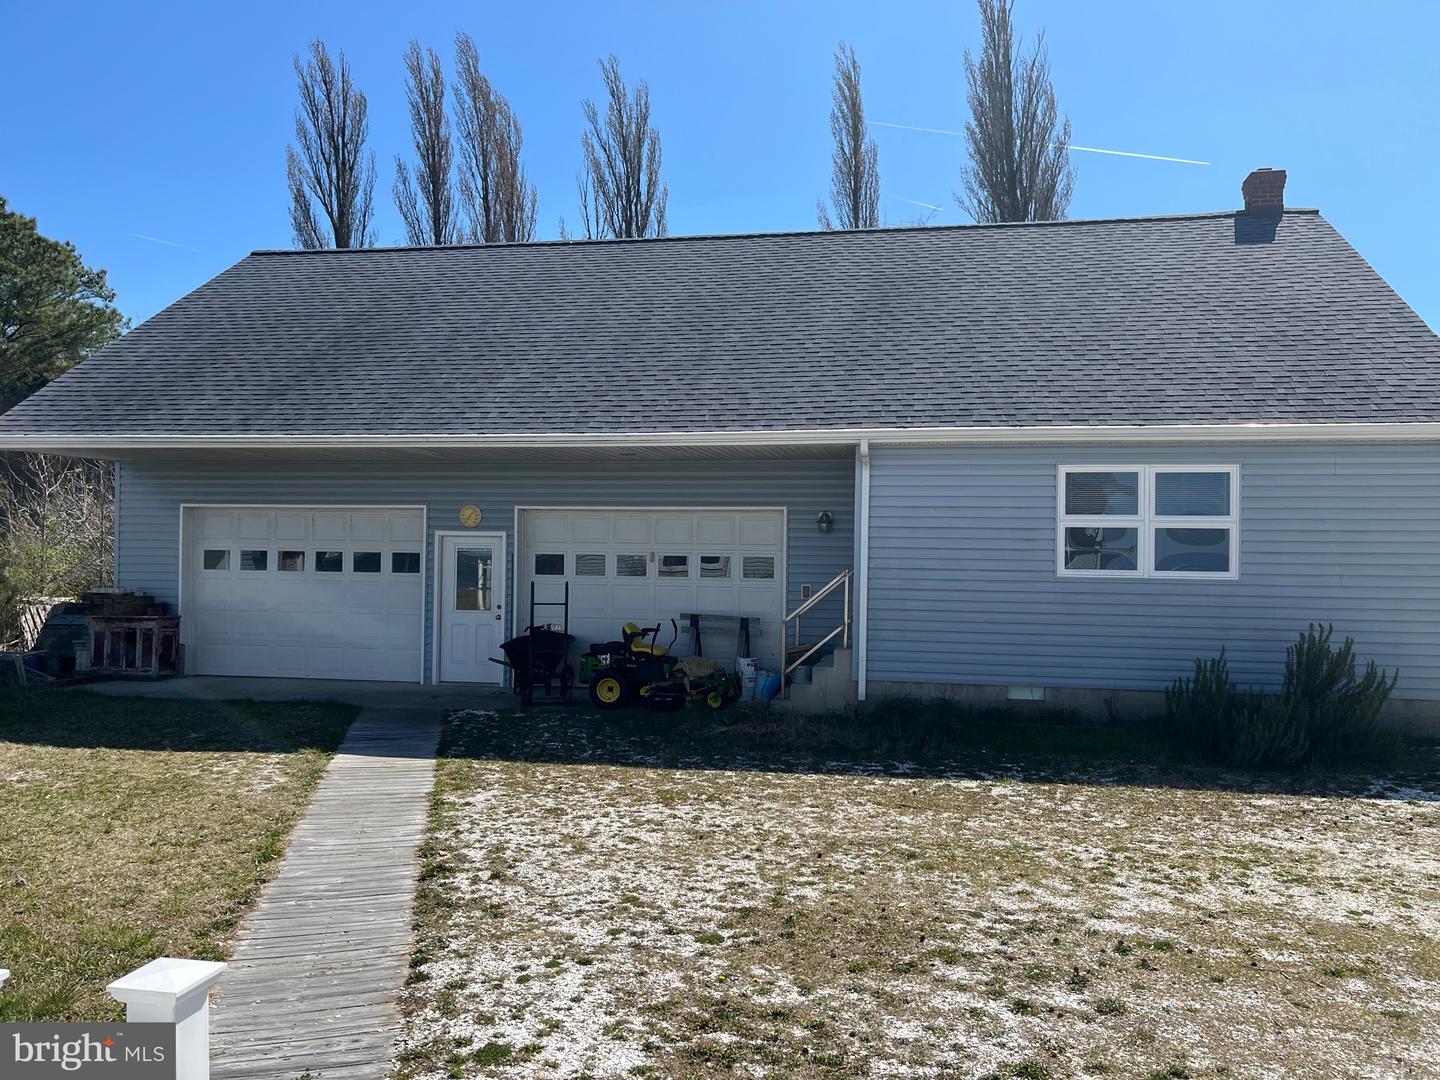 MDSO2004392-802940002526-2024-04-05-00-17-05 11513 Hodson White Rd | Deal Island, Md Real Estate For Sale | MLS# Mdso2004392  - Keti Lynch